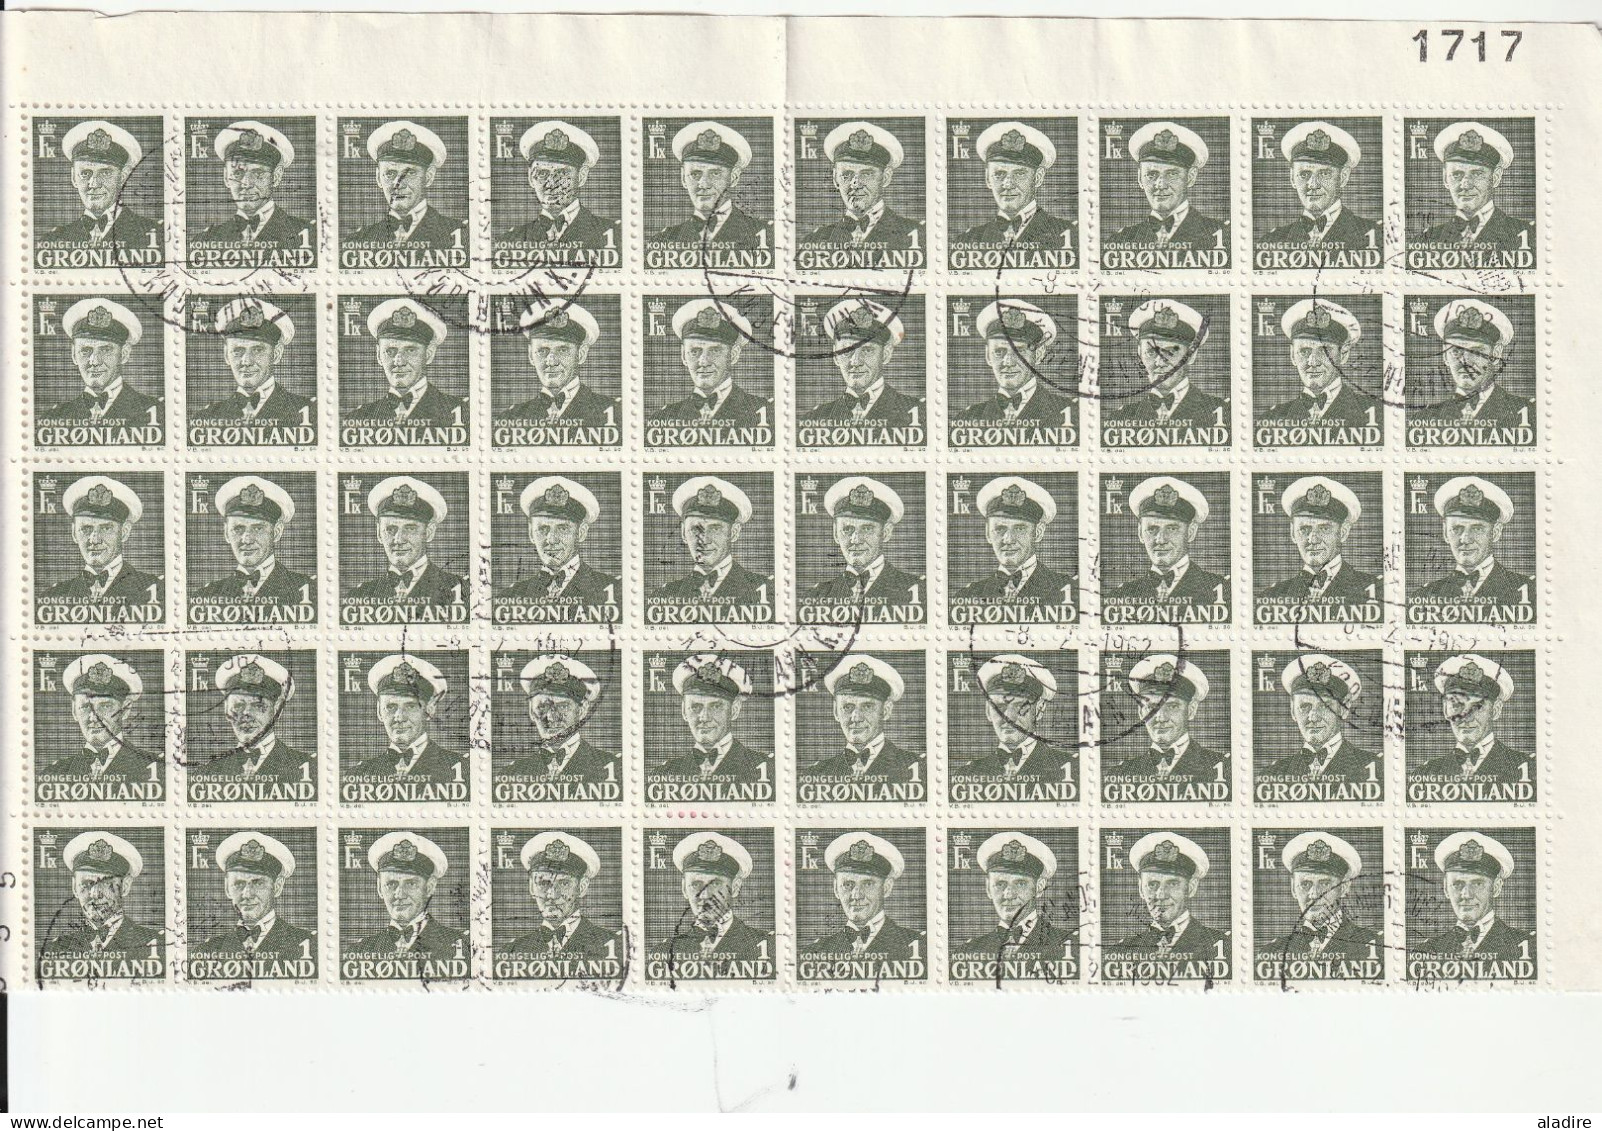 DENMARK DANMARK Danemark - 1839 / 1938 - collection of 7 old letters and cards - 14 scans